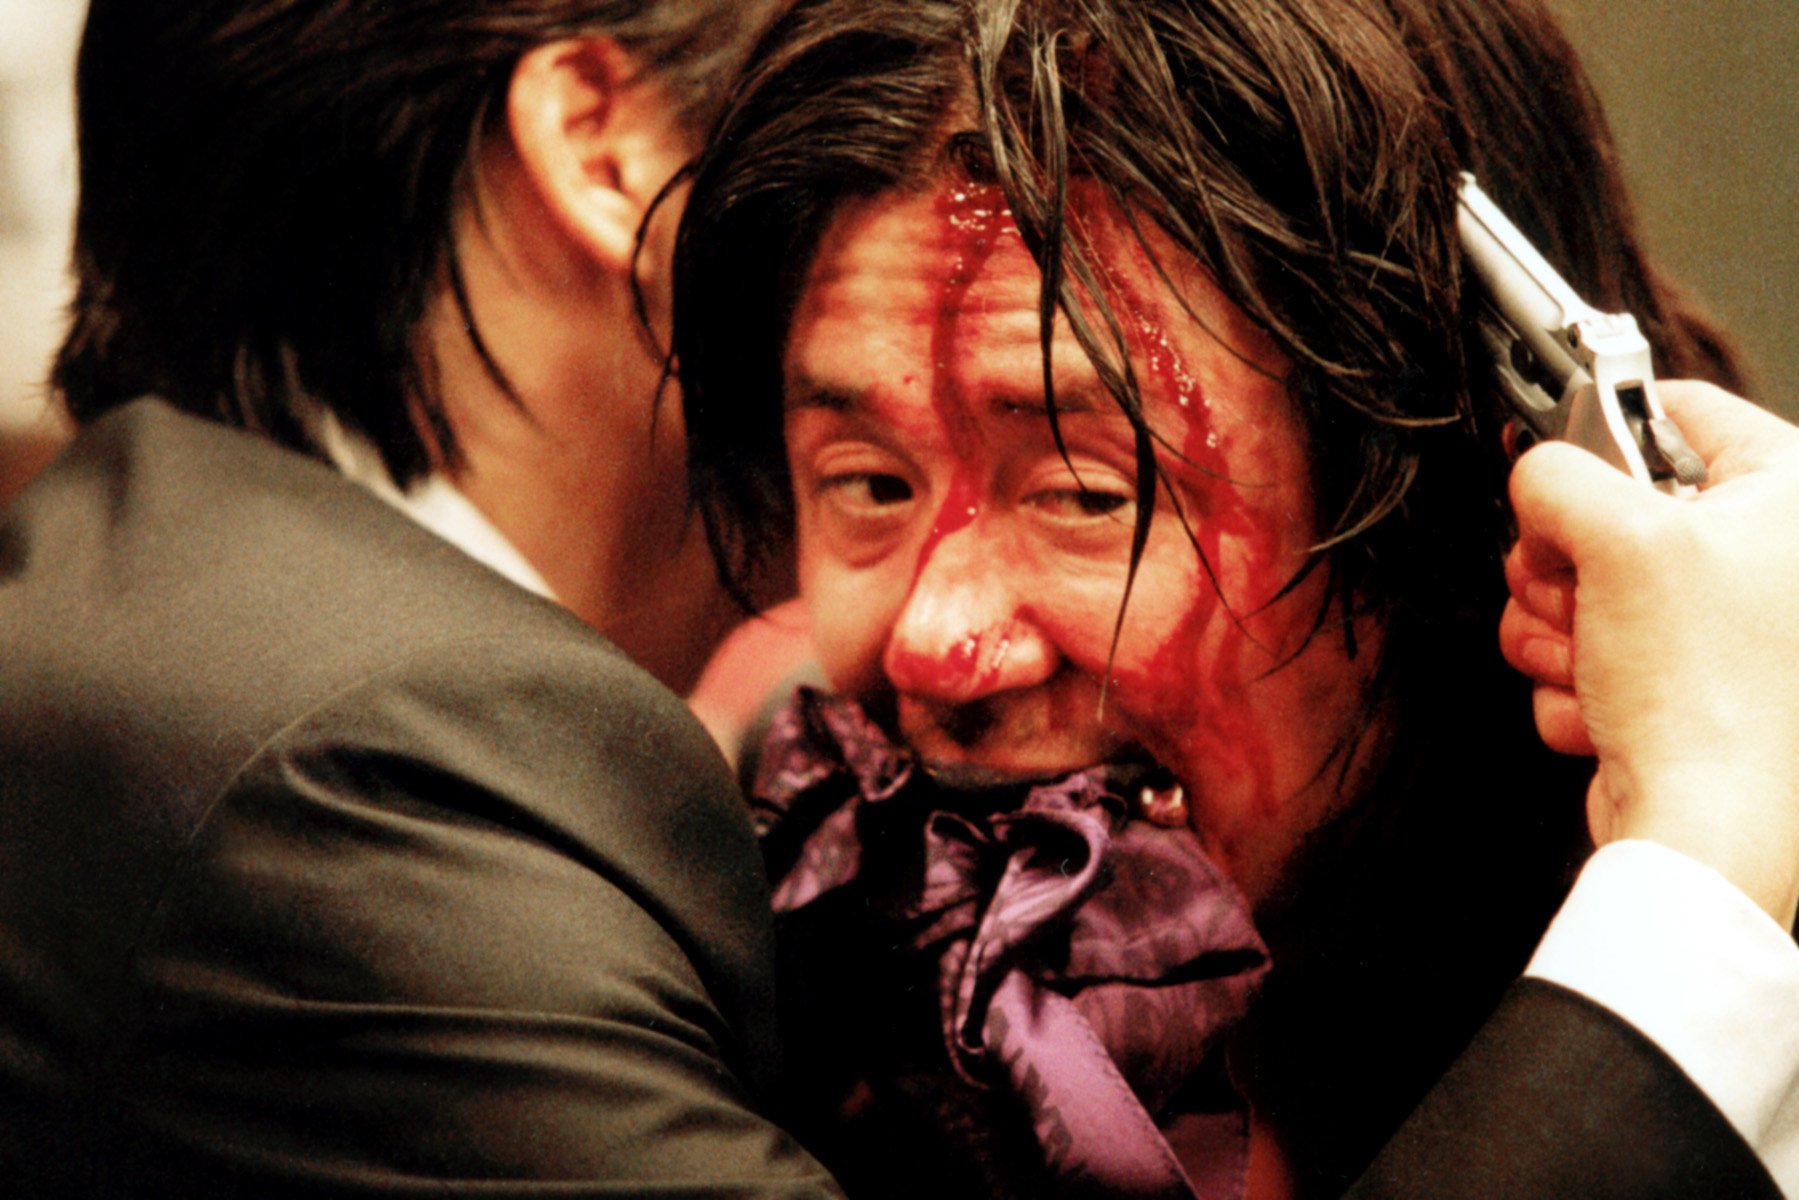 Min-sik&#x27;s character covered in blood while another character puts a gun to his head